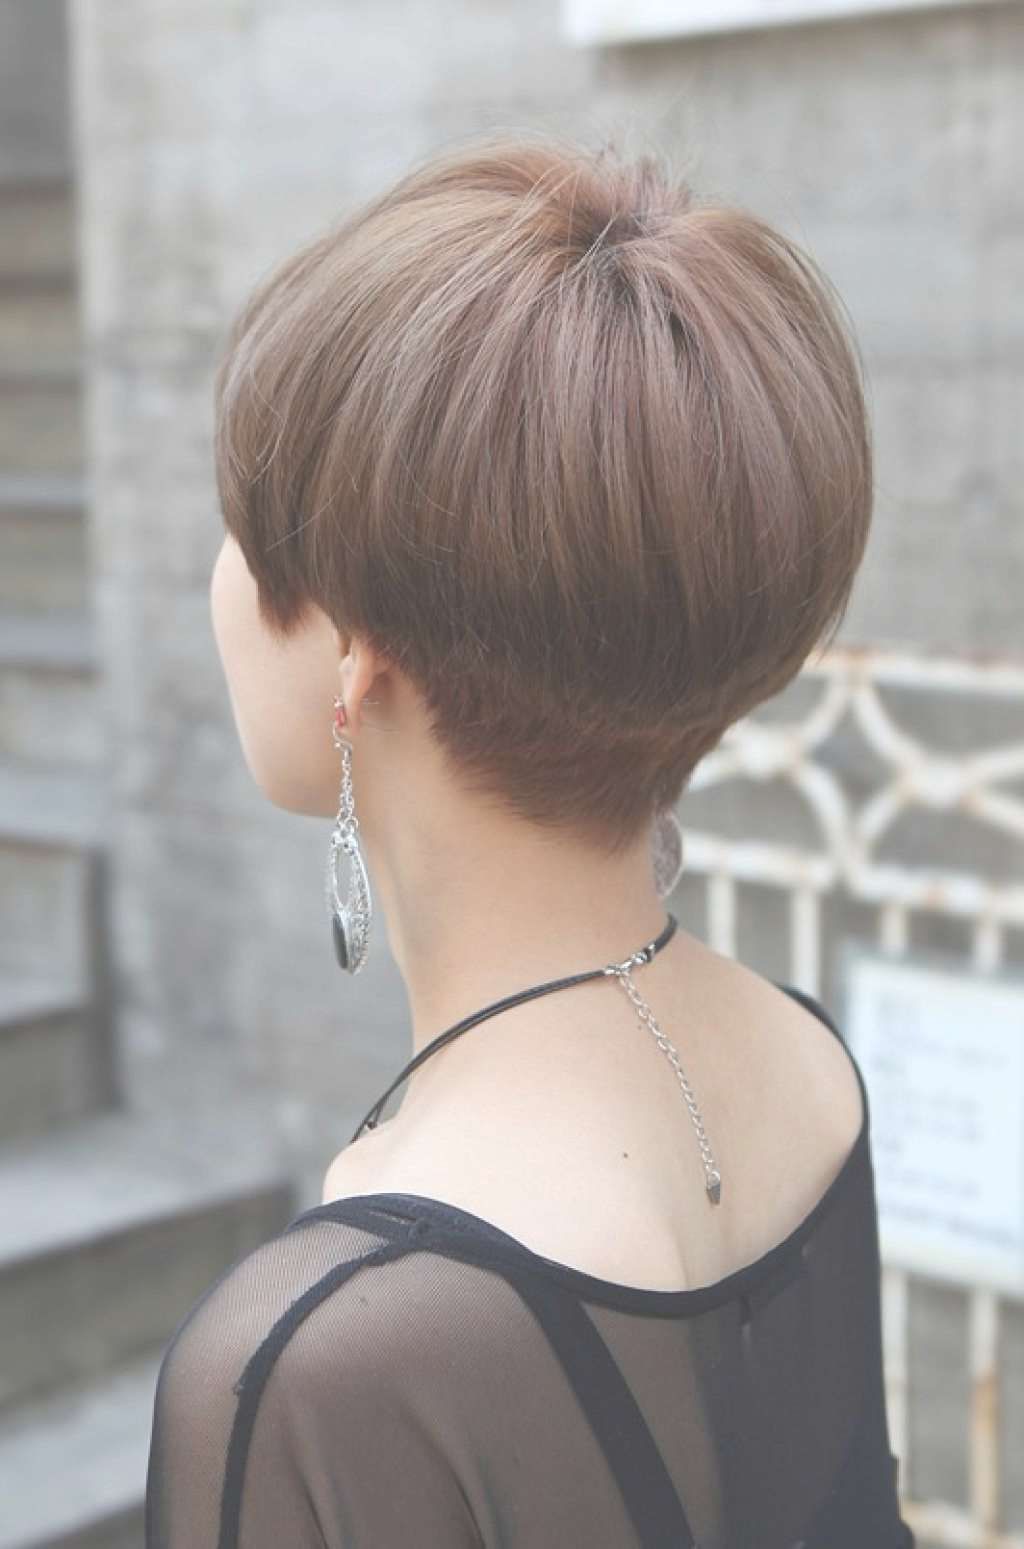 Related Posts Of "back View Of Short Wedge Haircut" | Hairstyles With Most Current Back Views Of Pixie Hairstyles (View 11 of 15)